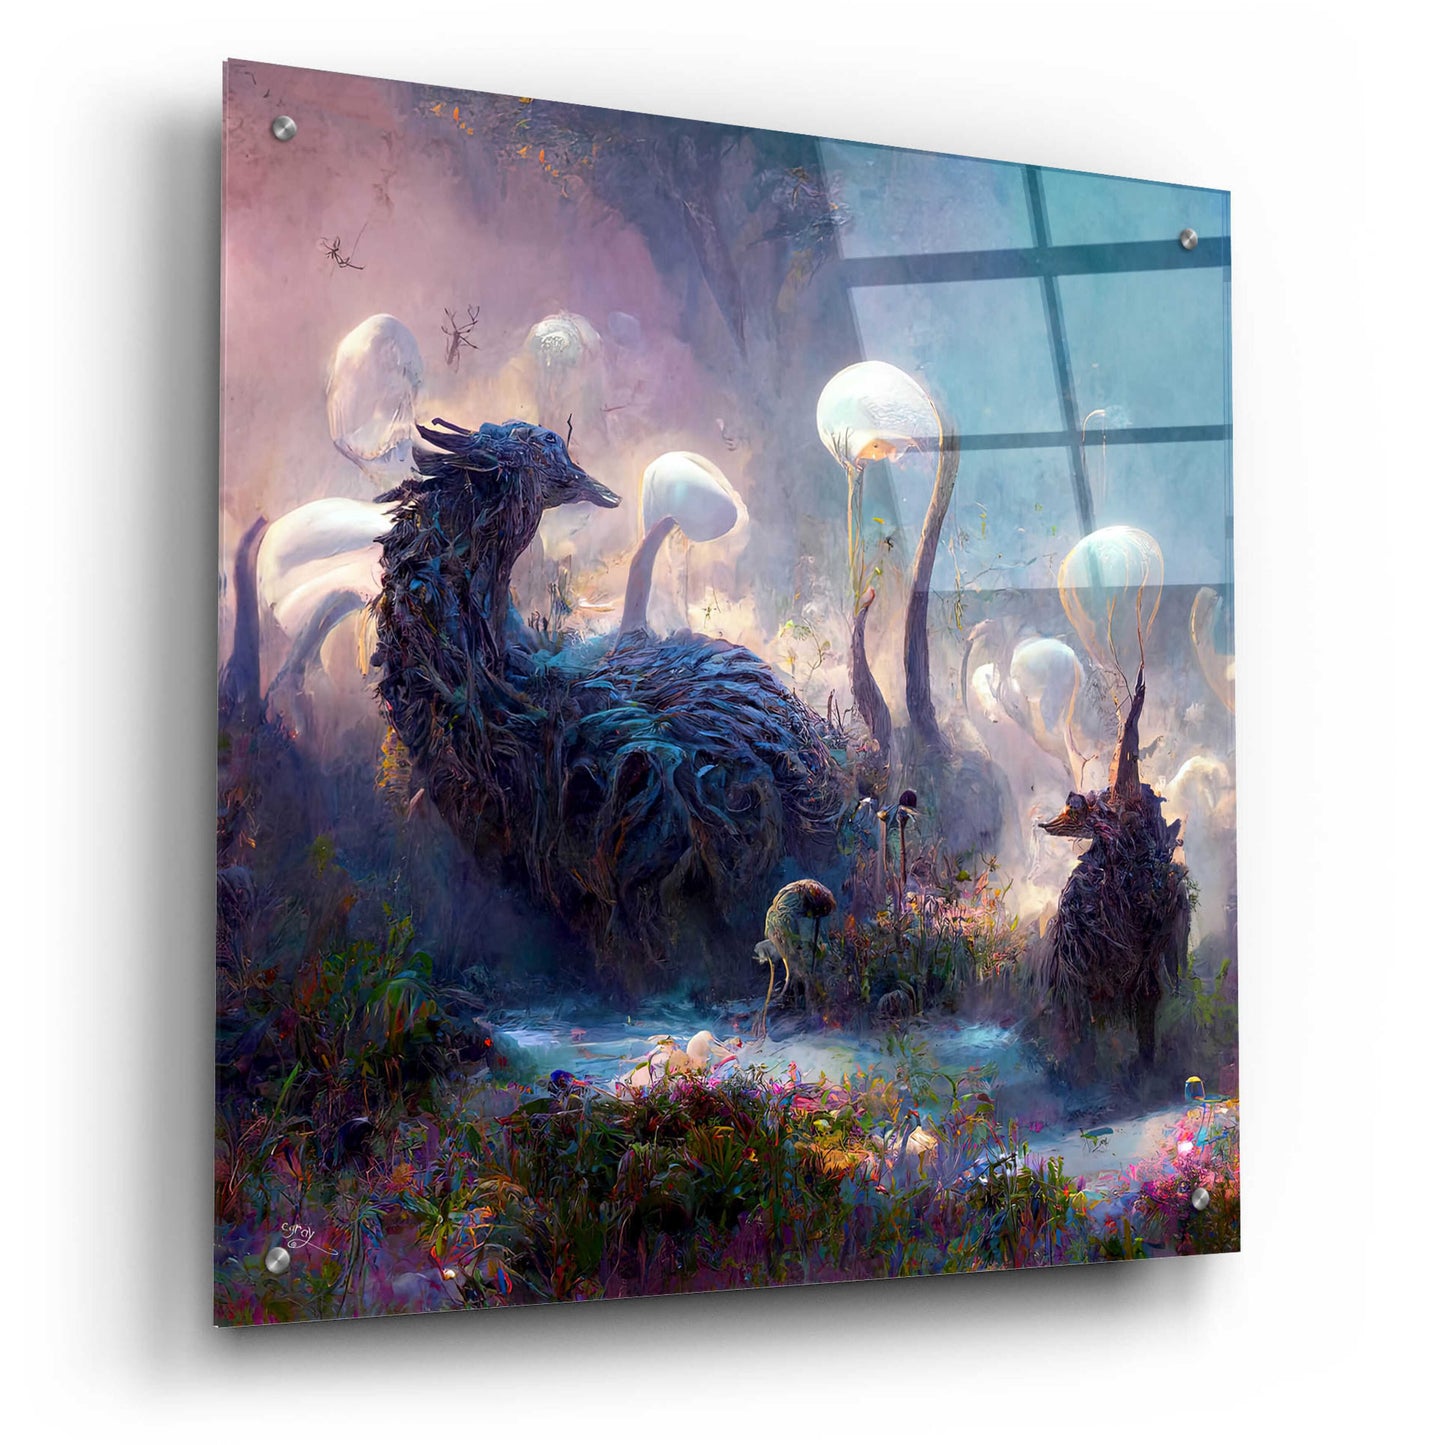 Epic Art 'Dreamscapes 2' by Cameron Gray, Acrylic Glass Wall Art,24x24